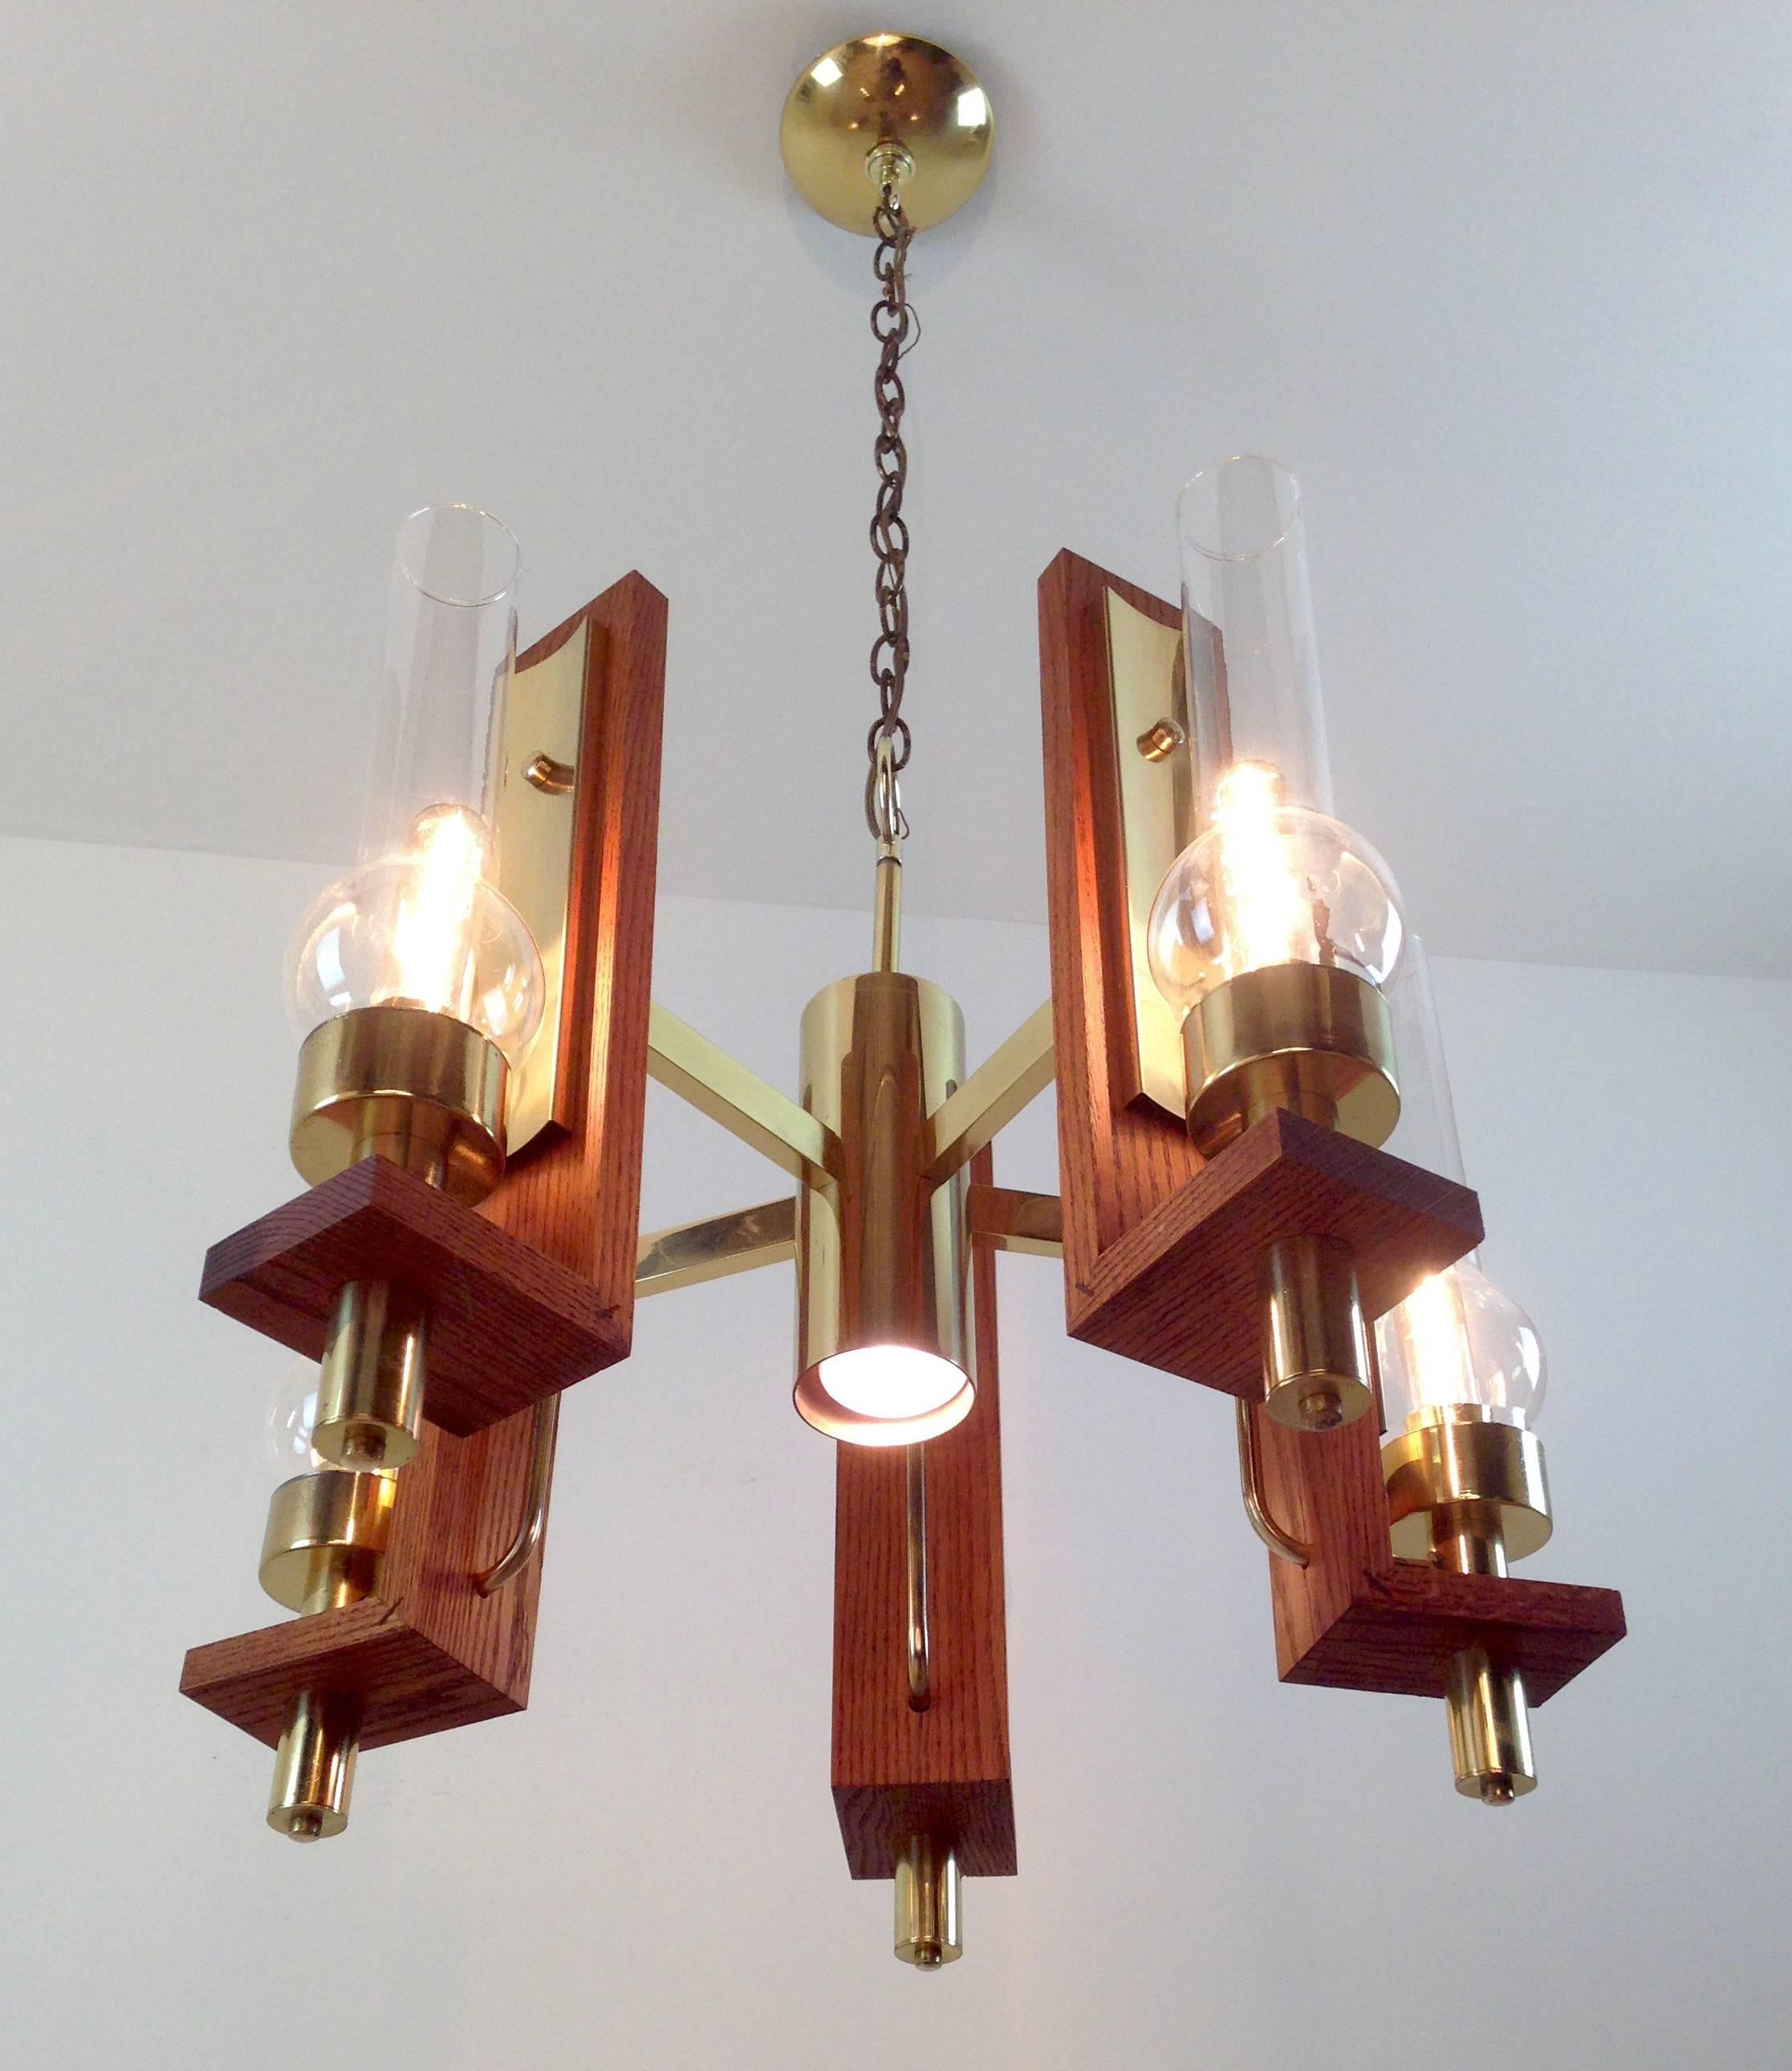 This signed Vintage Sonneman chandelier was created circa 1960 and represents his early work in the lamp industry.

This lamp is constructed of solid plate brass, red oak and glass and weighs over 40 pounds. The total height is 42" though this